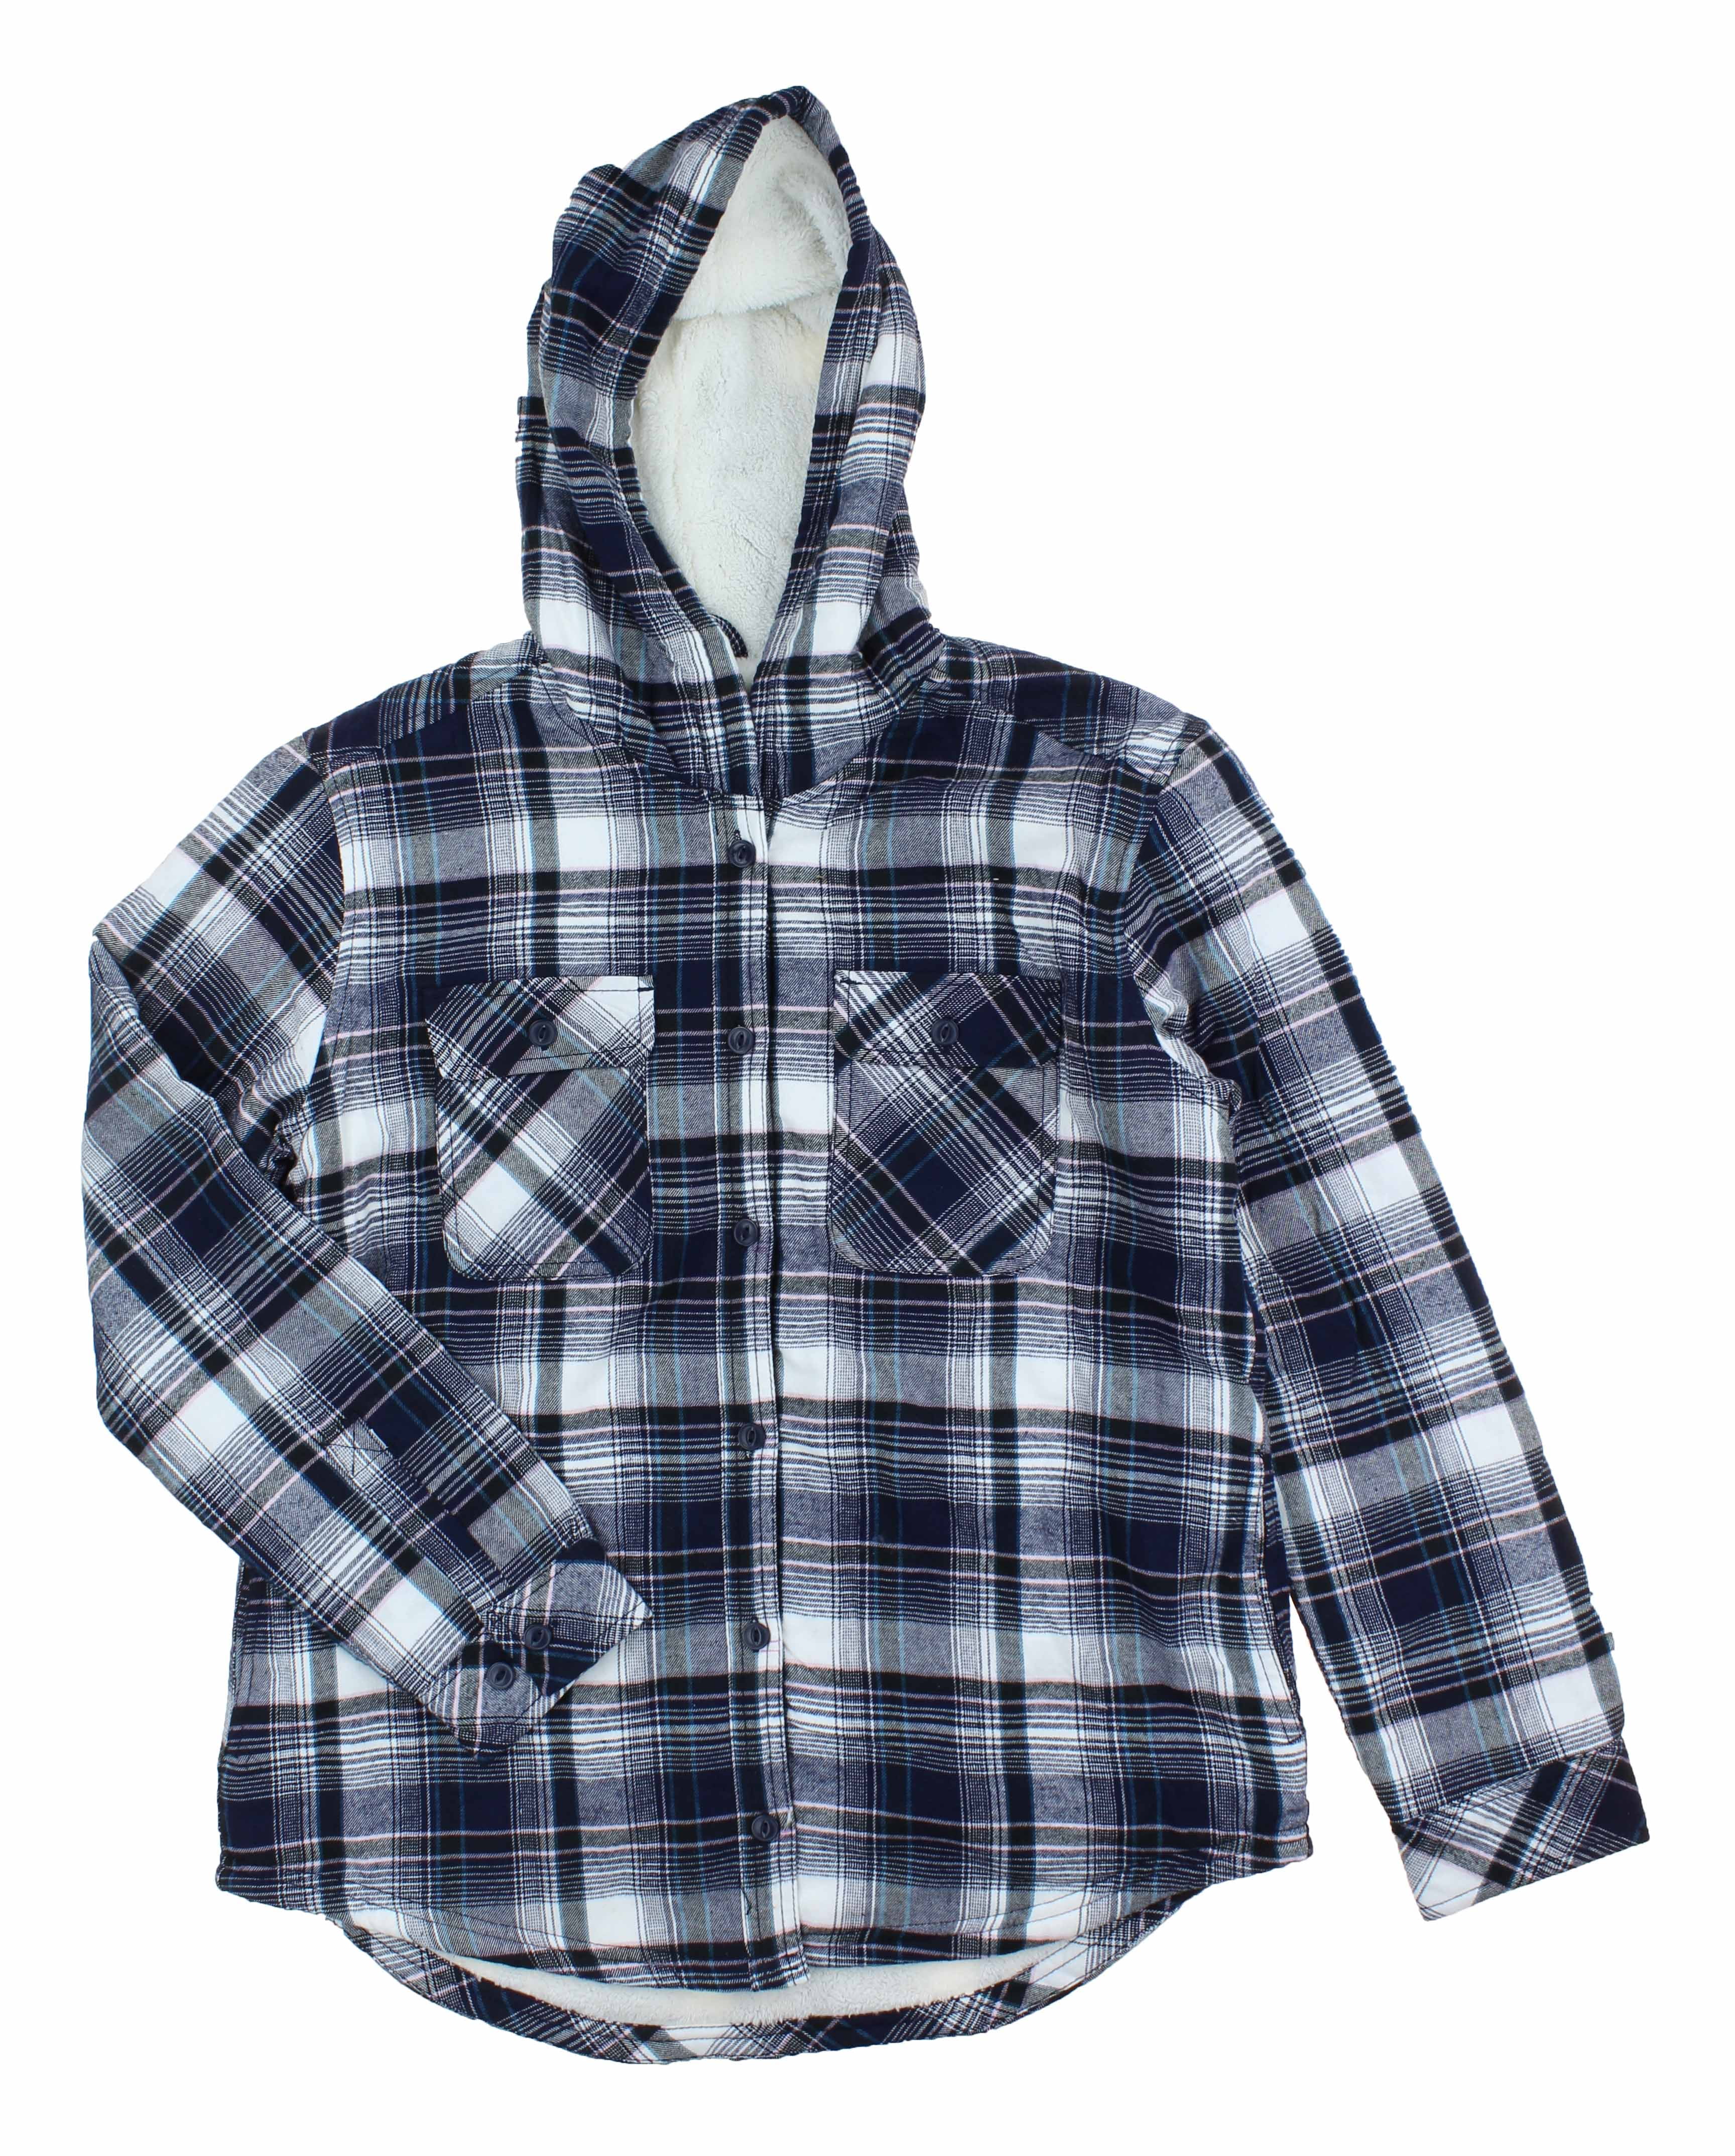 Boston Traders Womens Hooded Flannel Top Shirt Jacket (Night Sky ...